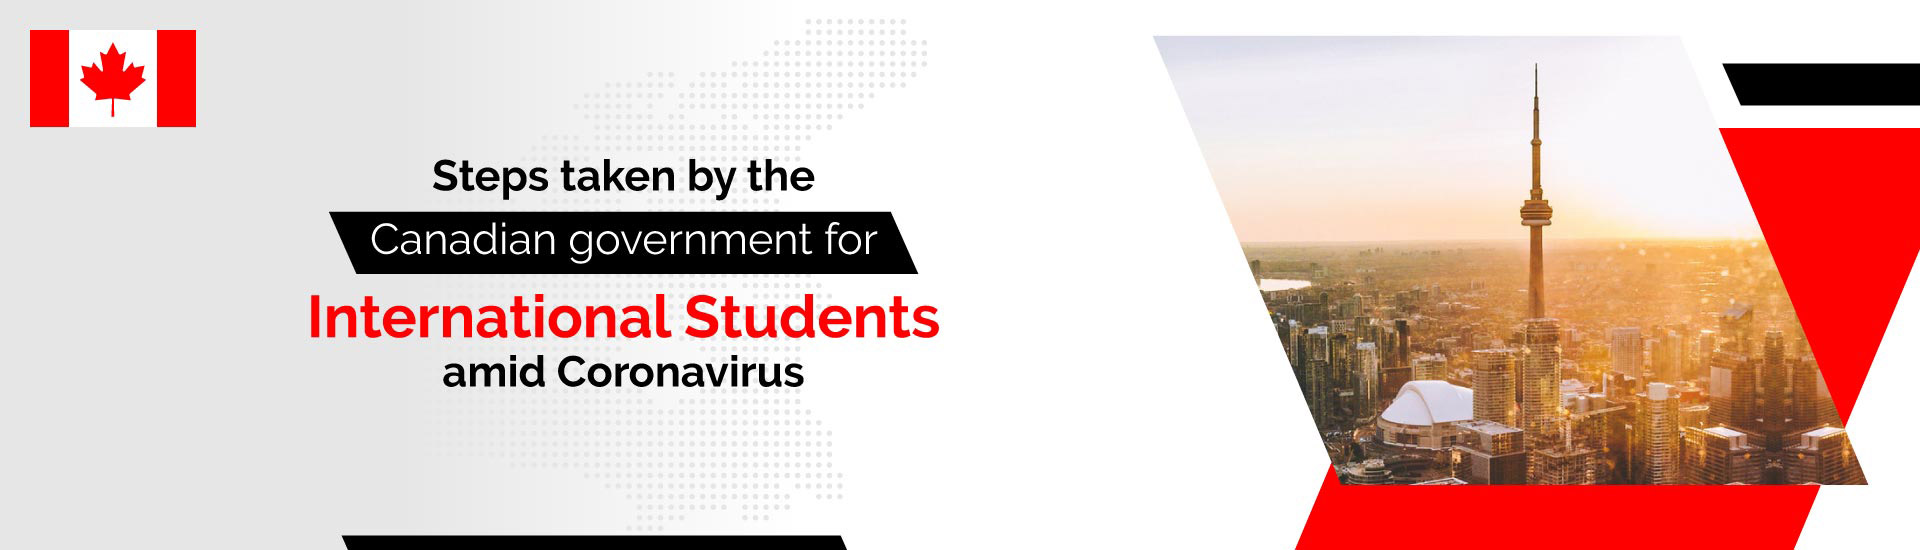 Steps taken by the Canadian government for International students amid Coronavirus